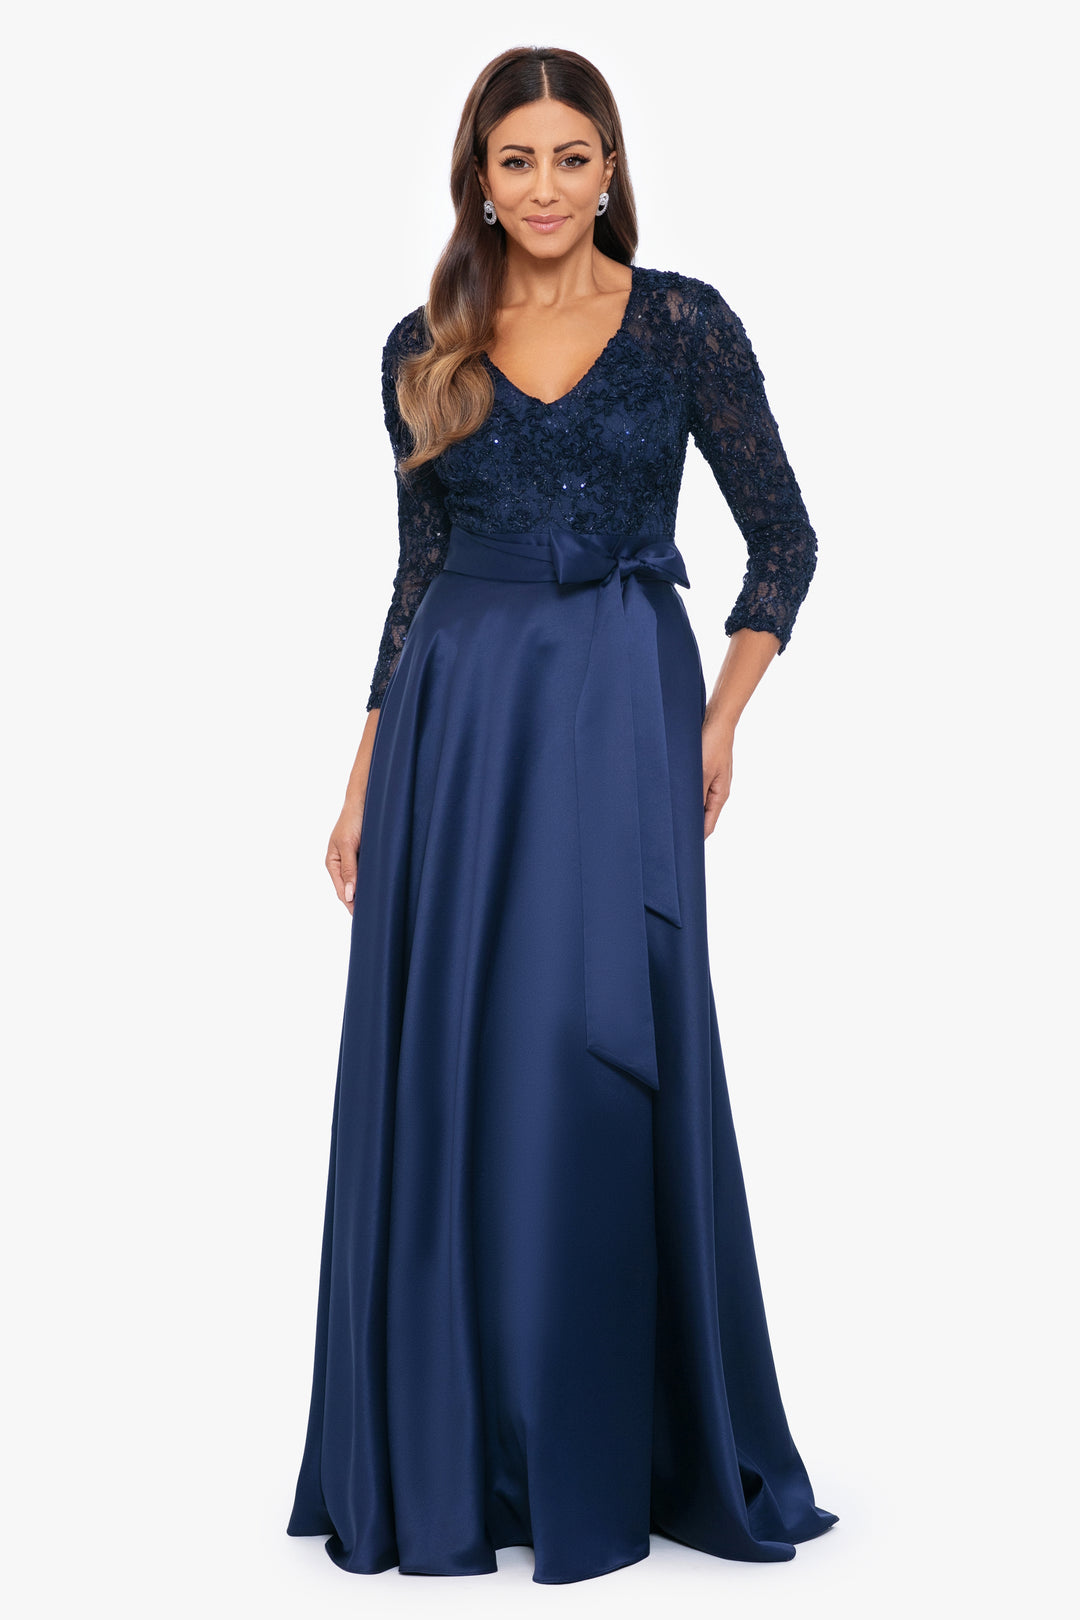 "Cordelia" Long Lace and Satin 3/4 Sleeve Ball Gown